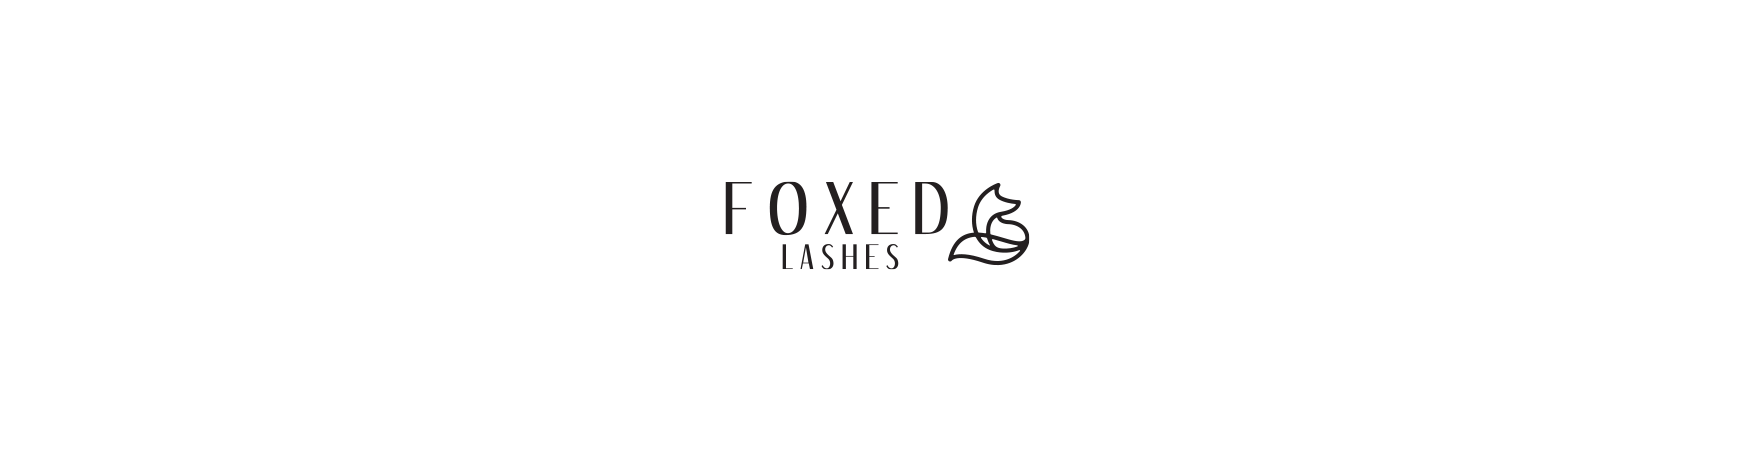 Foxed Lashes